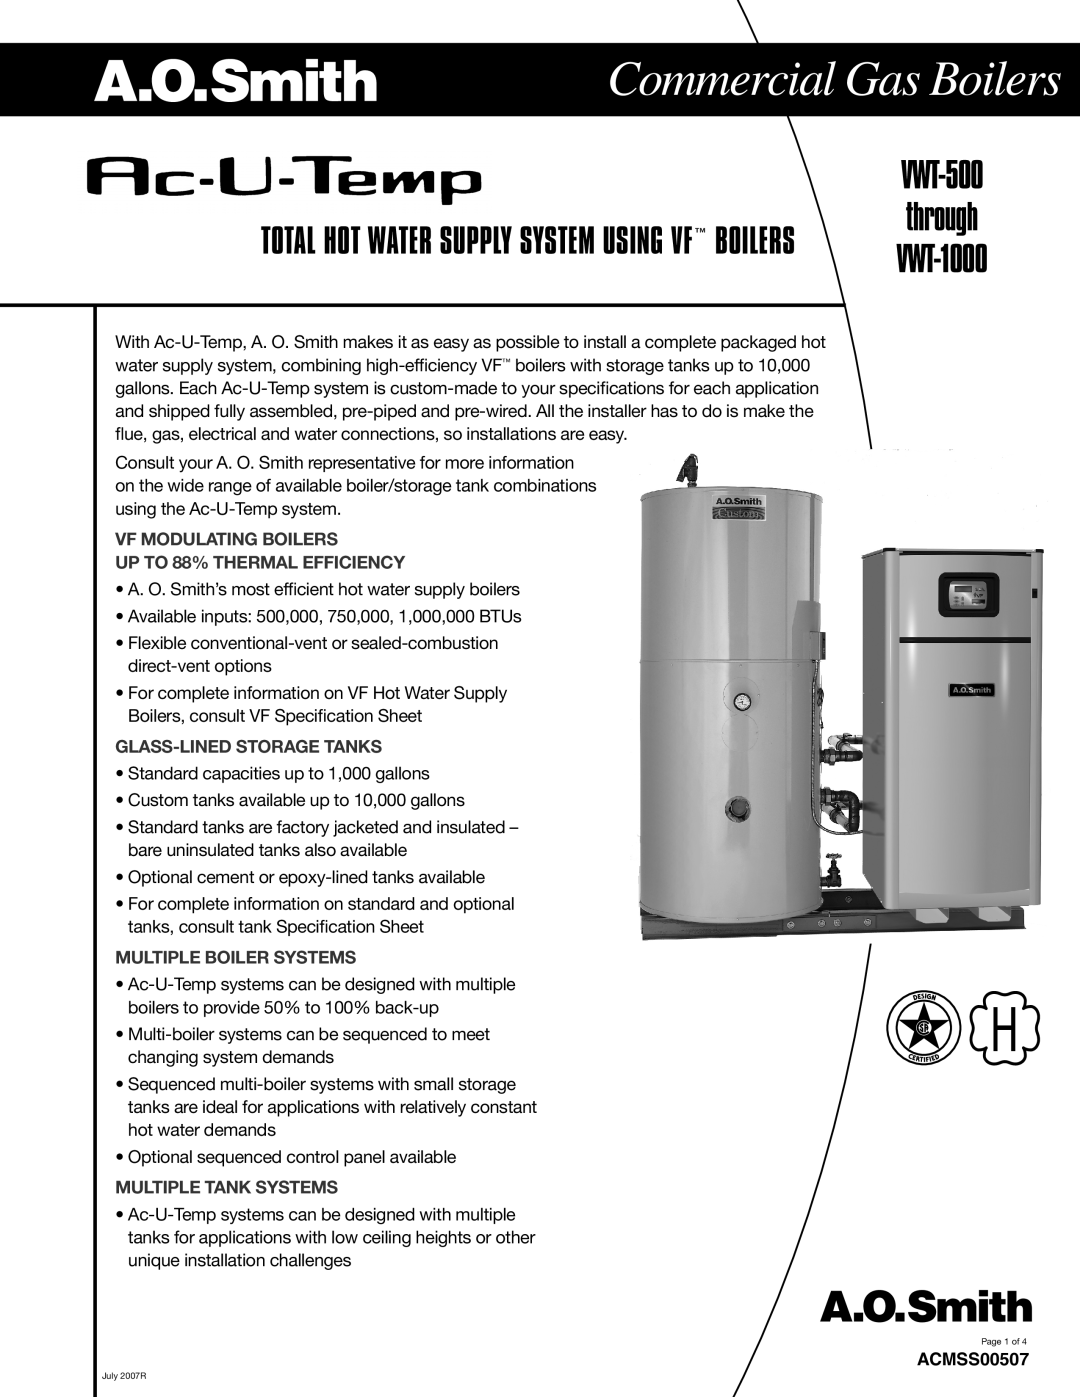 A.O. Smith VWT-500 specifications Commercial Gas Boilers, VF MODULATING BOILERS UP TO 88% THERMAL EFFICIENCY, ACMSS00507 